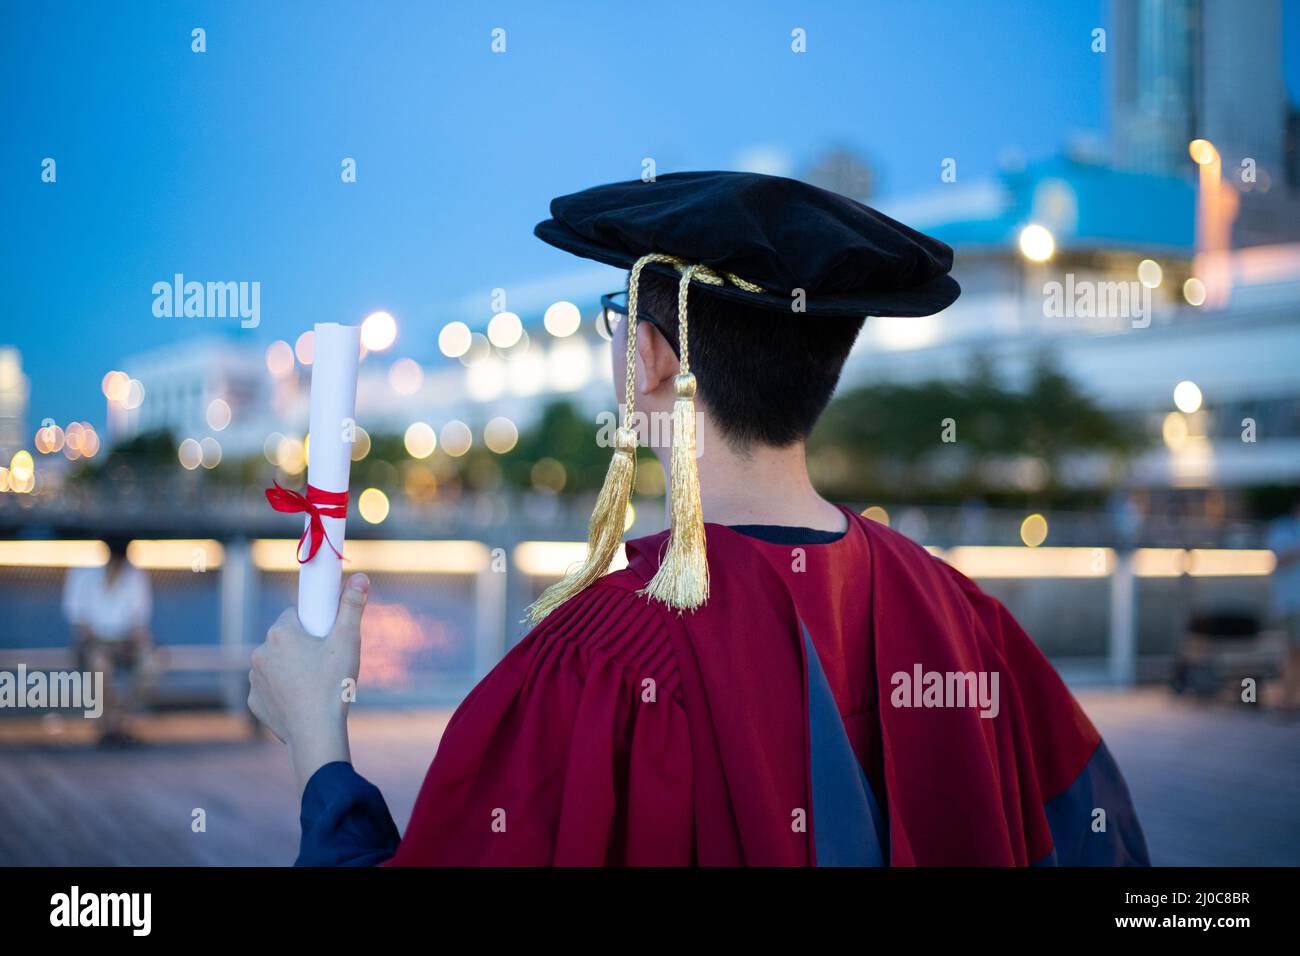 happy proud PhD graduated male students in Academic dress gown with certificate facing colorful city nights. back view Stock Photo